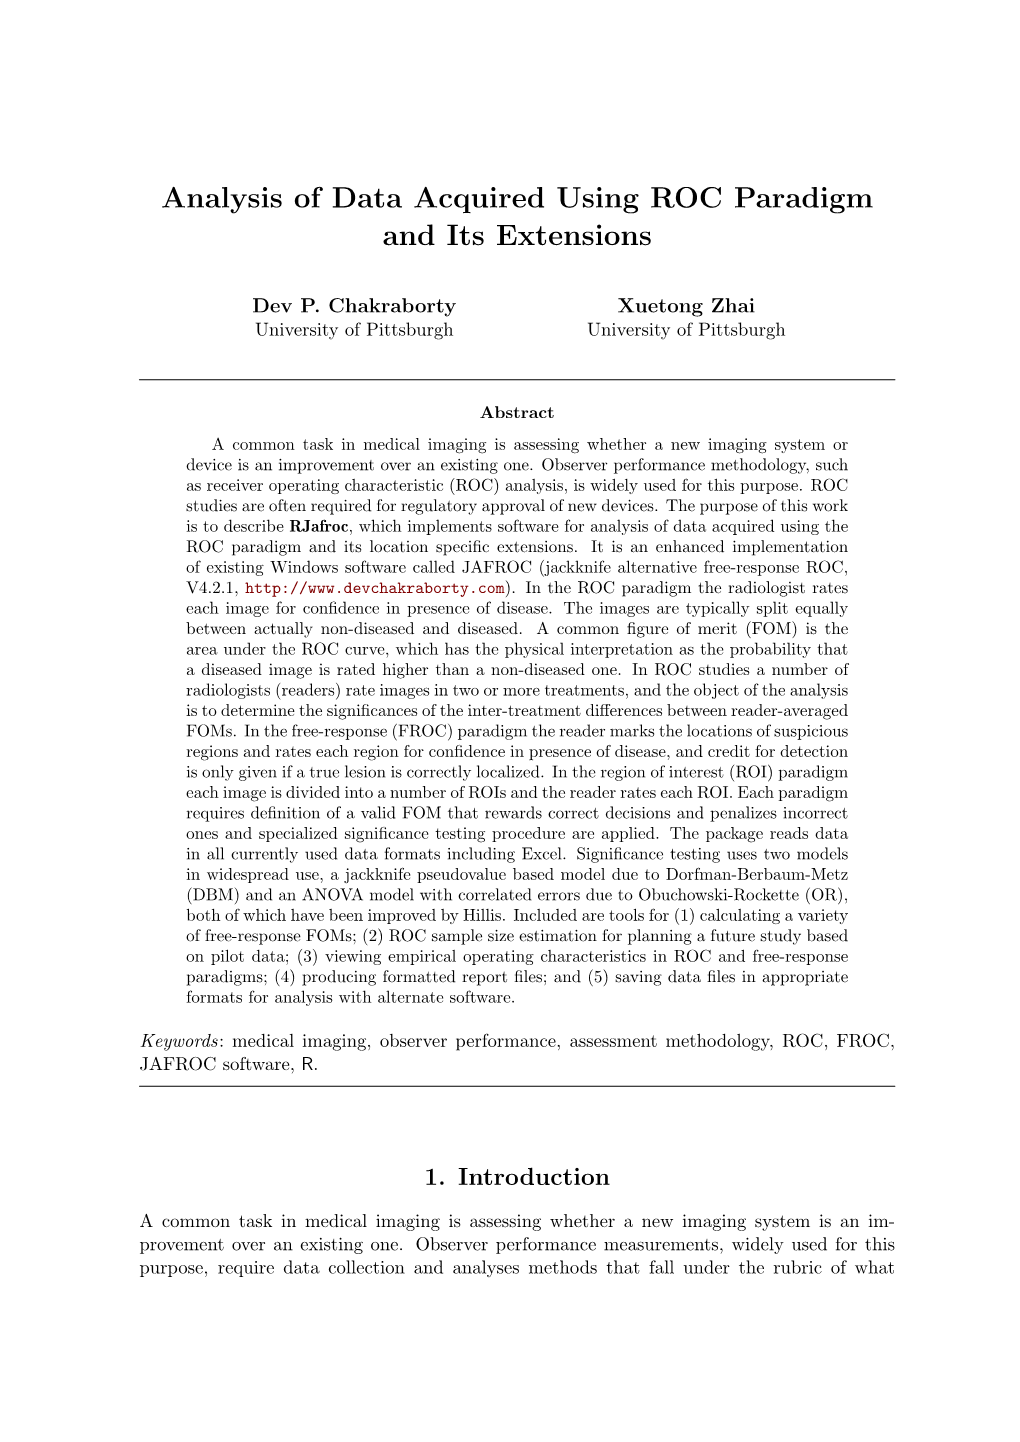 Analysis of Data Acquired Using ROC Paradigm and Its Extensions